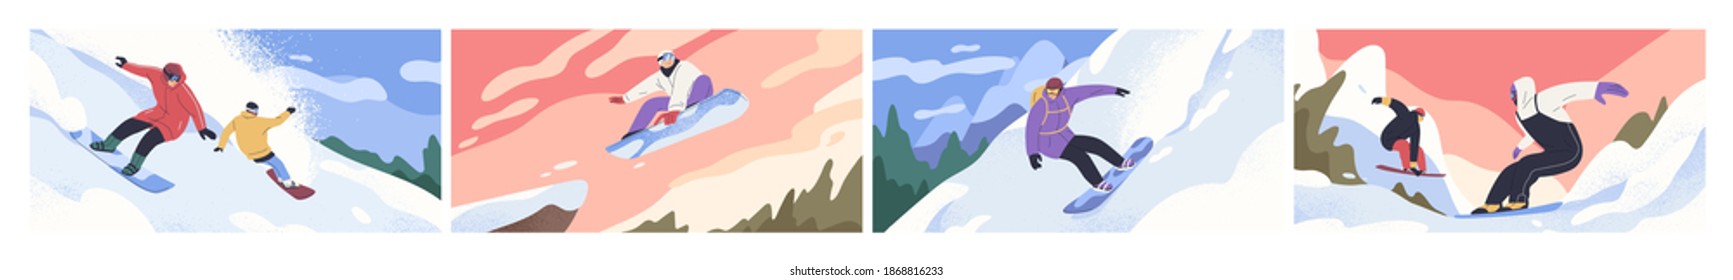 Set of scenes of snowboarders riding boards at snowy mountainsides or slopes. People in winter outfit sliding and jumping with snowboards. Outdoor sports activity. Colorful flat vector illustration - Shutterstock ID 1868816233